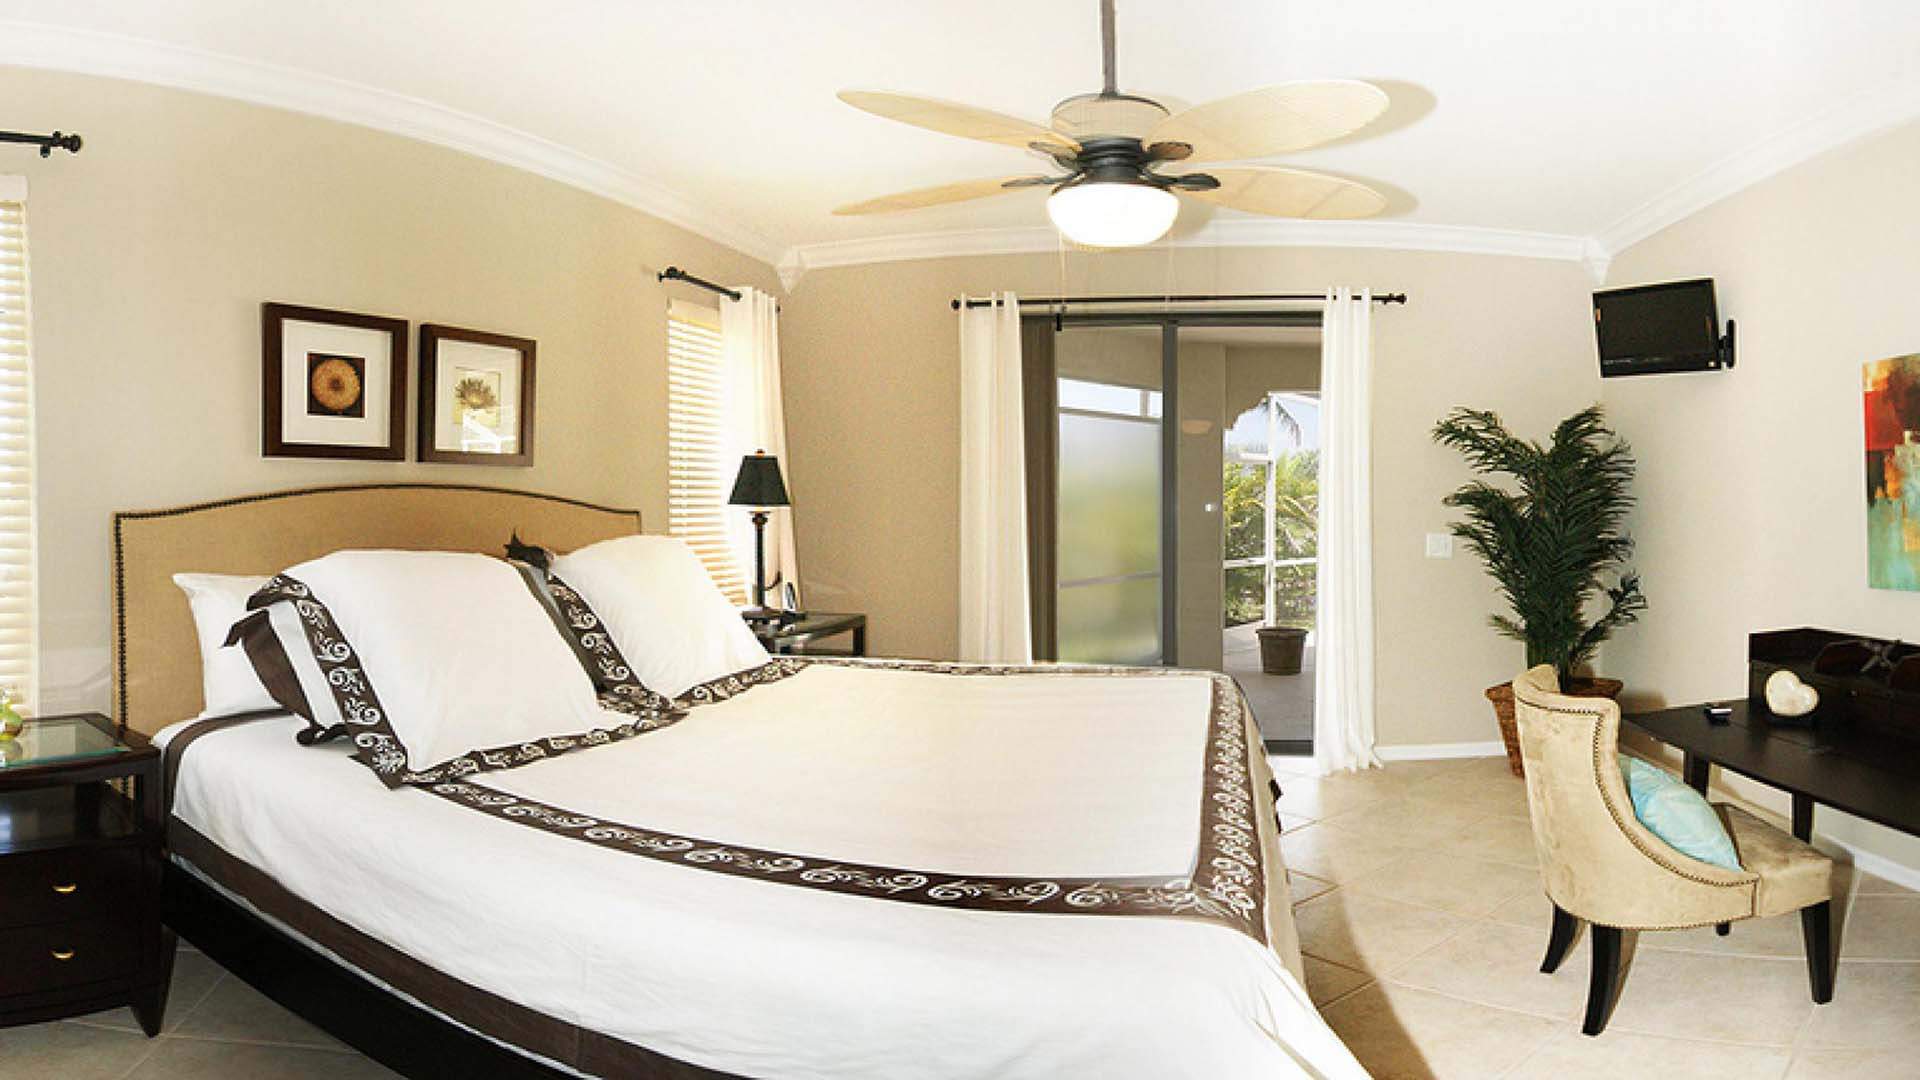 This beautiful bedroom offers a King size bed and access to the patio